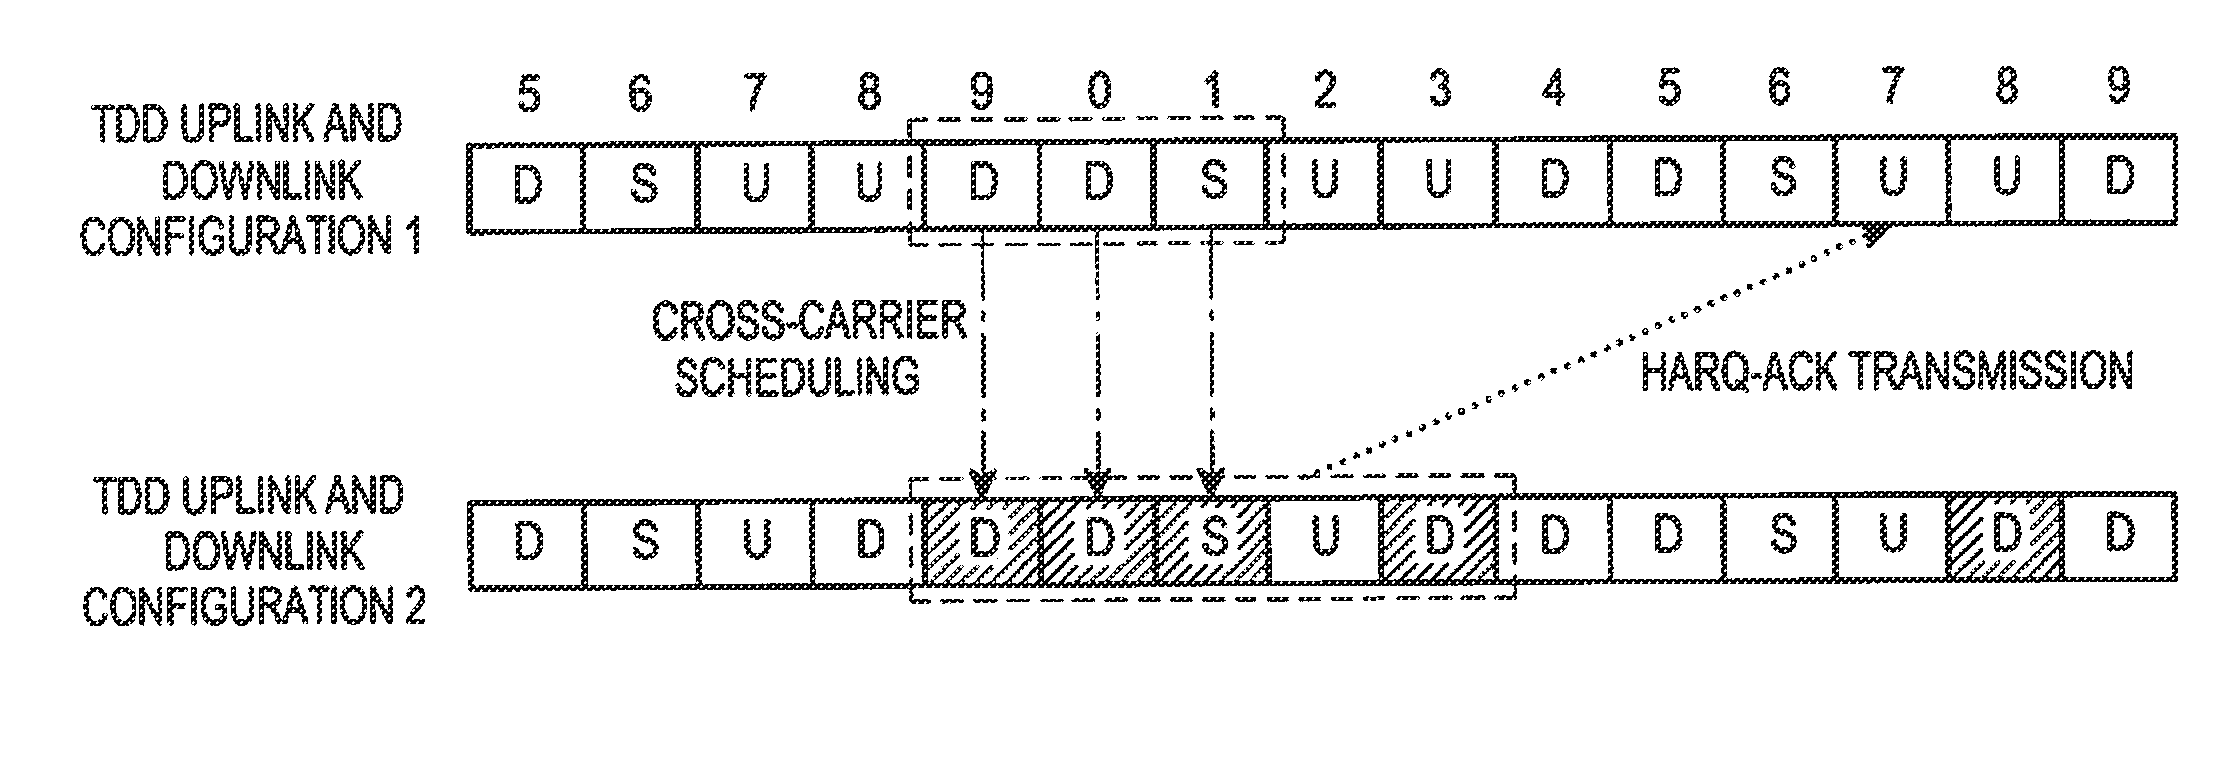 Physical downlink shared channel transmission method